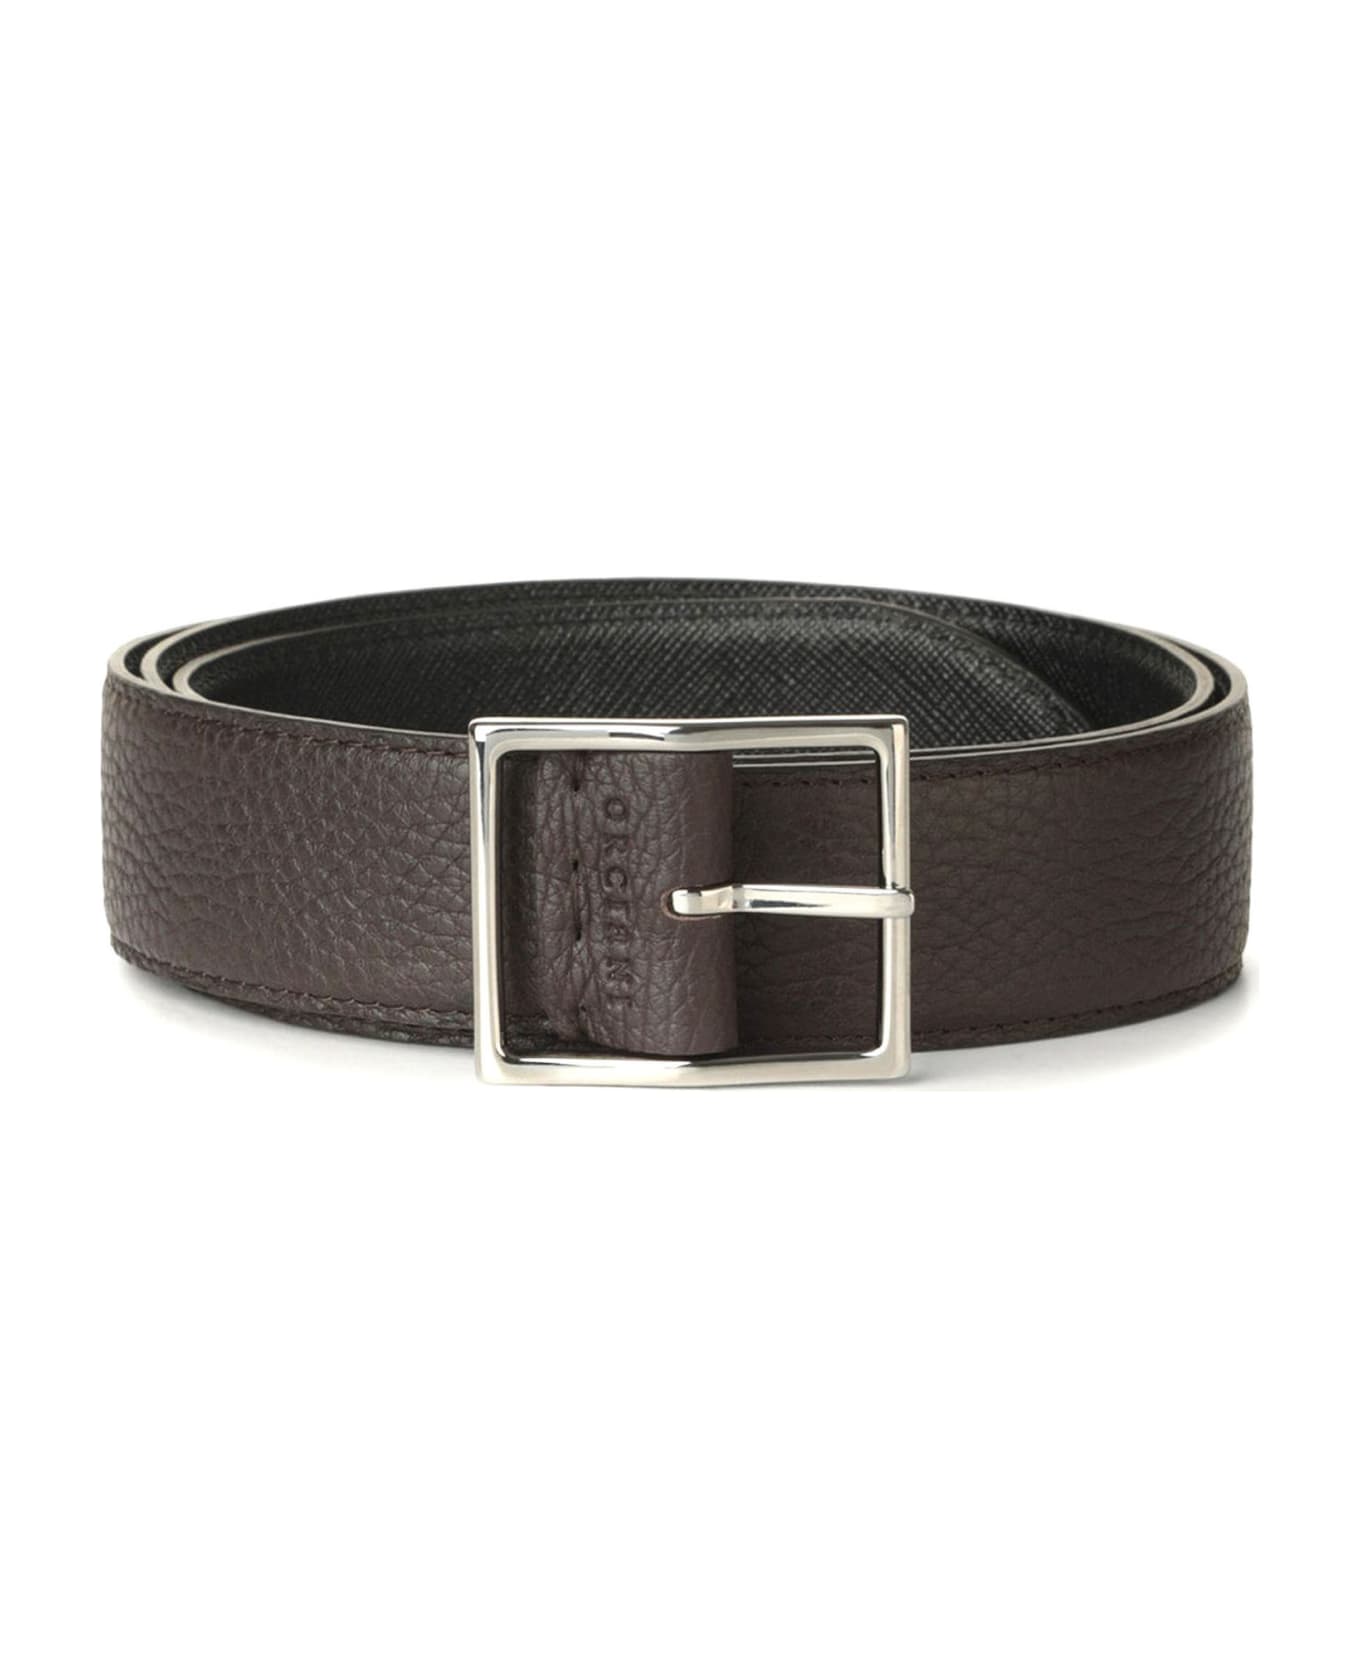 Orciani Brown Hammered Leather Belt - Bicolored ベルト